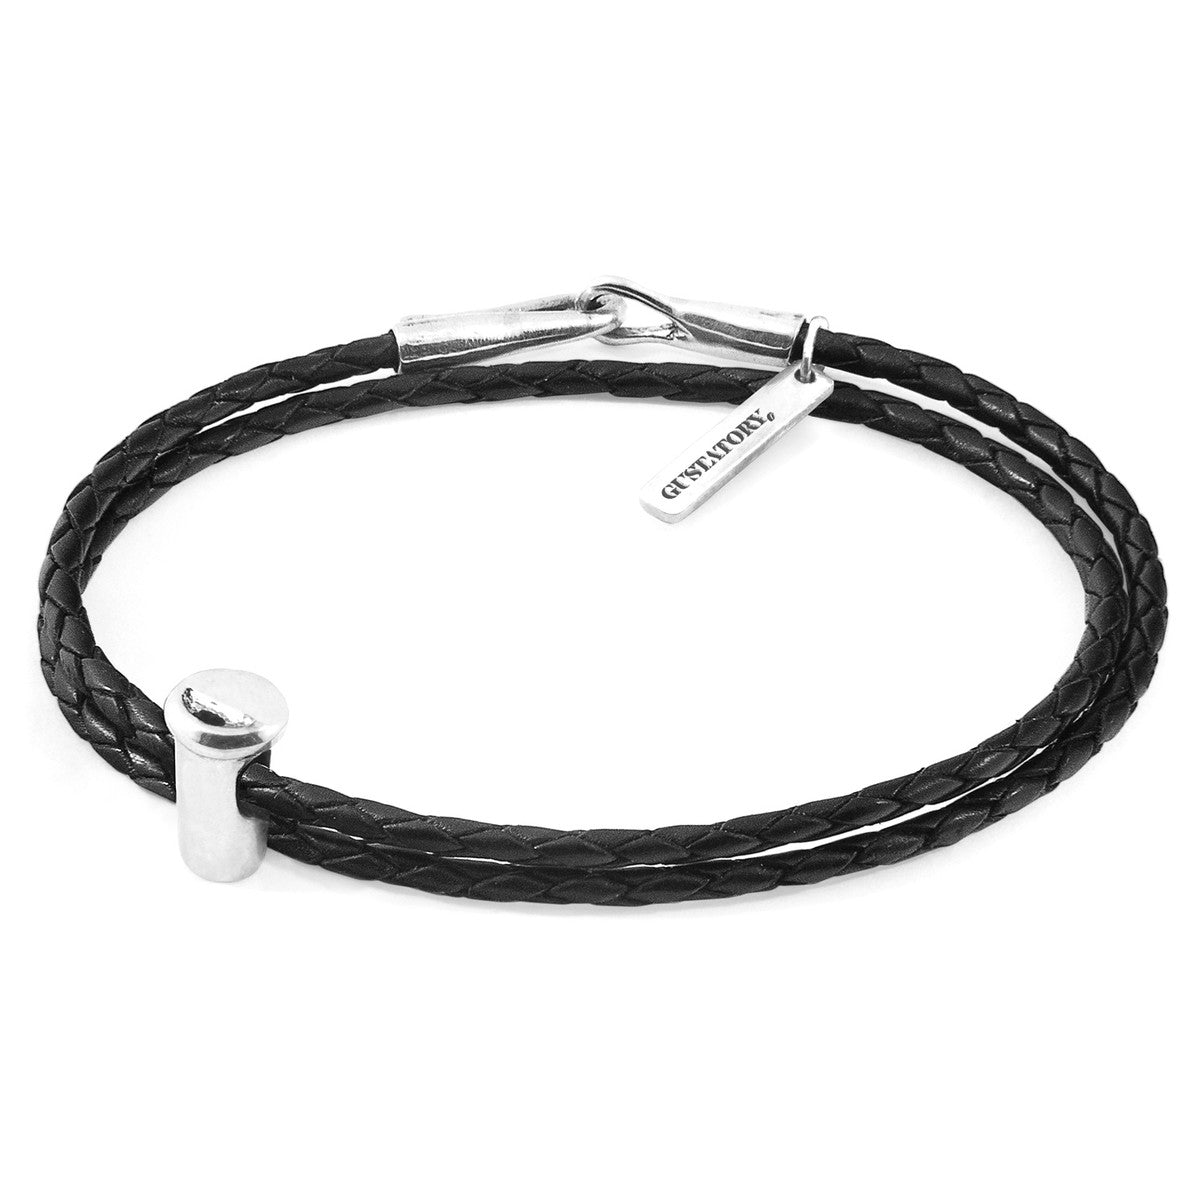 Midnight Black GUSTATORY Coffee Takeout Cup Silver and Braided Leather Bracelet